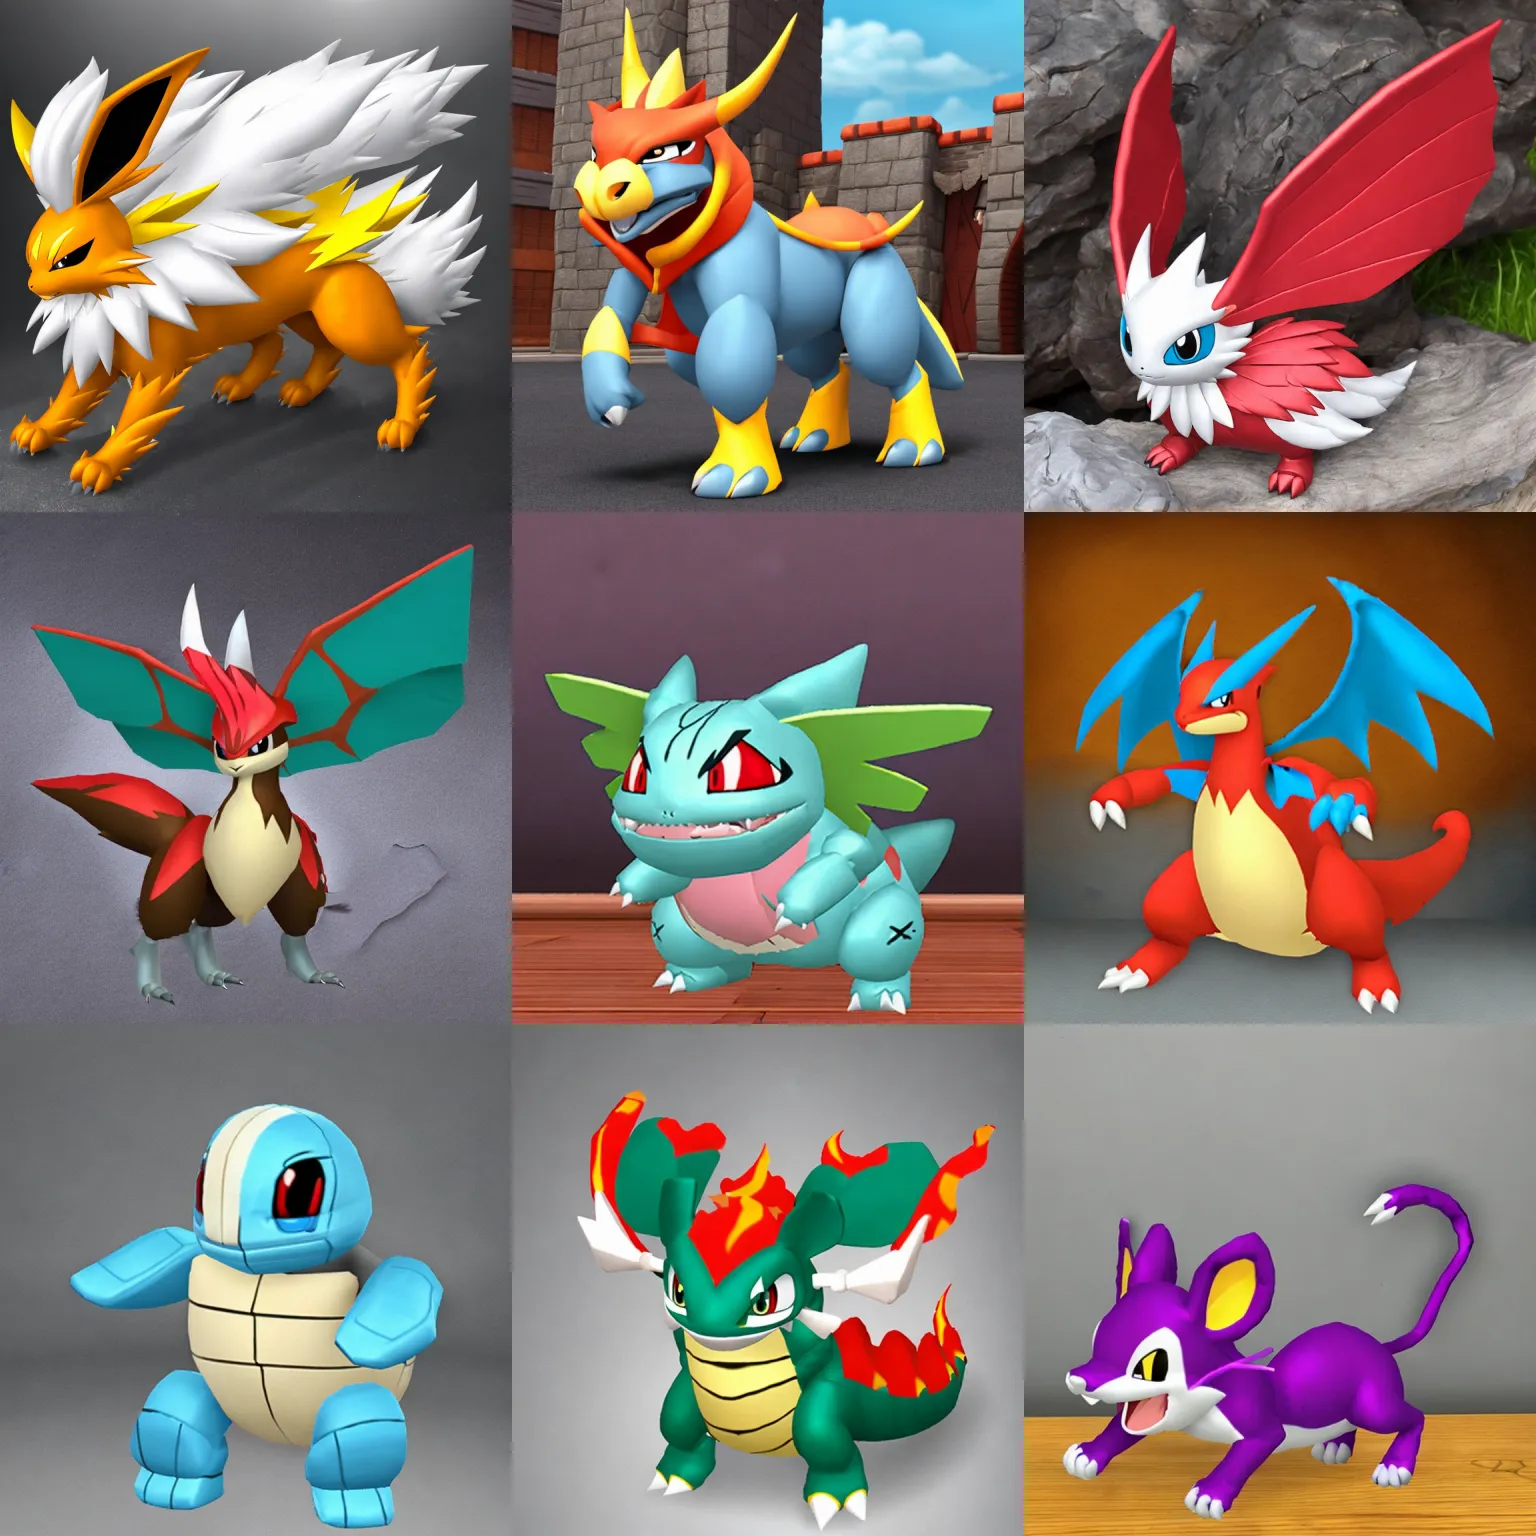 Example of images created using Pokemon3D model.